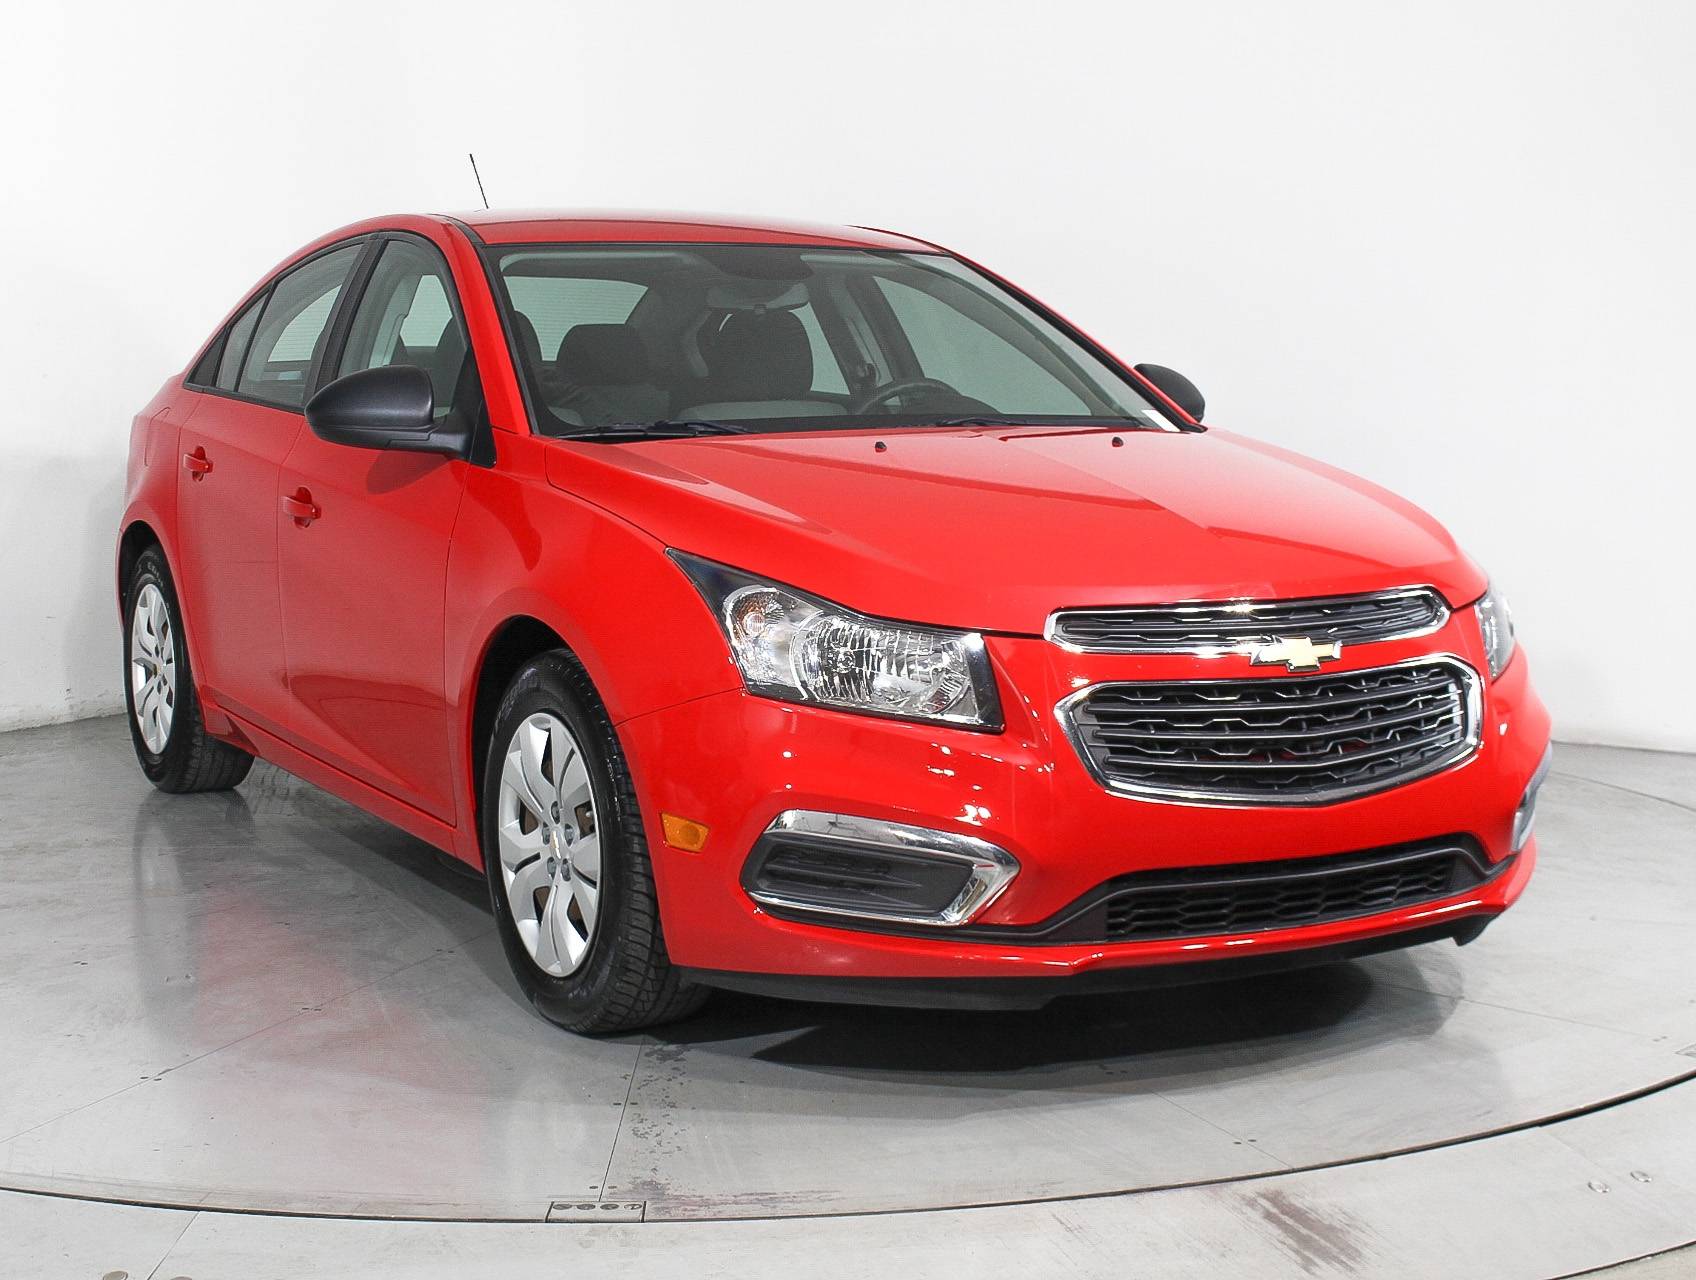 Florida Fine Cars - Used CHEVROLET Cruze 2016 HOLLYWOOD Limited Ls